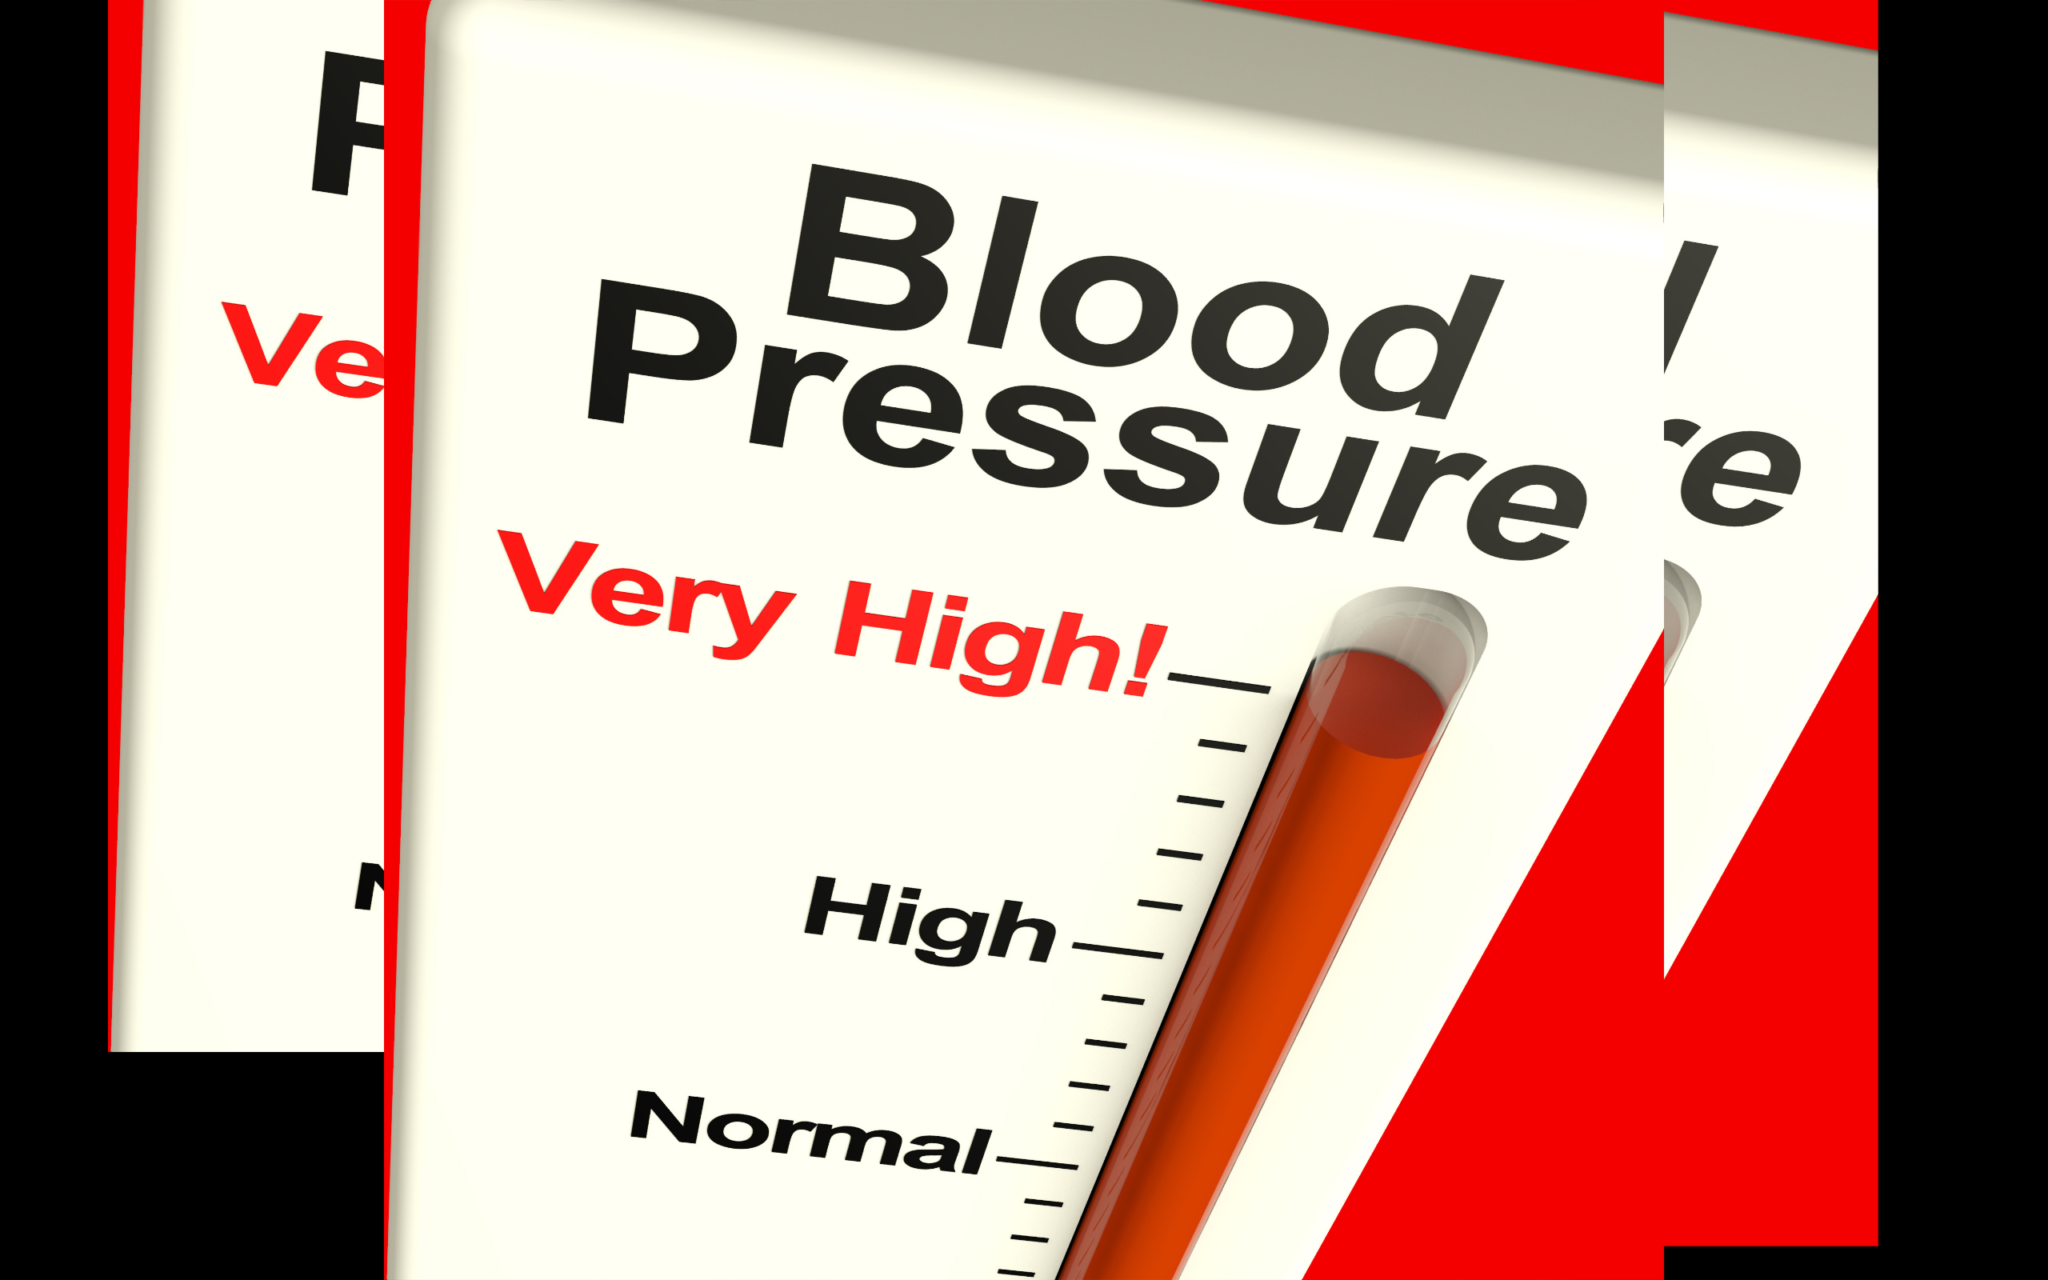 What’s the Goal of Blood Pressure Treatment?